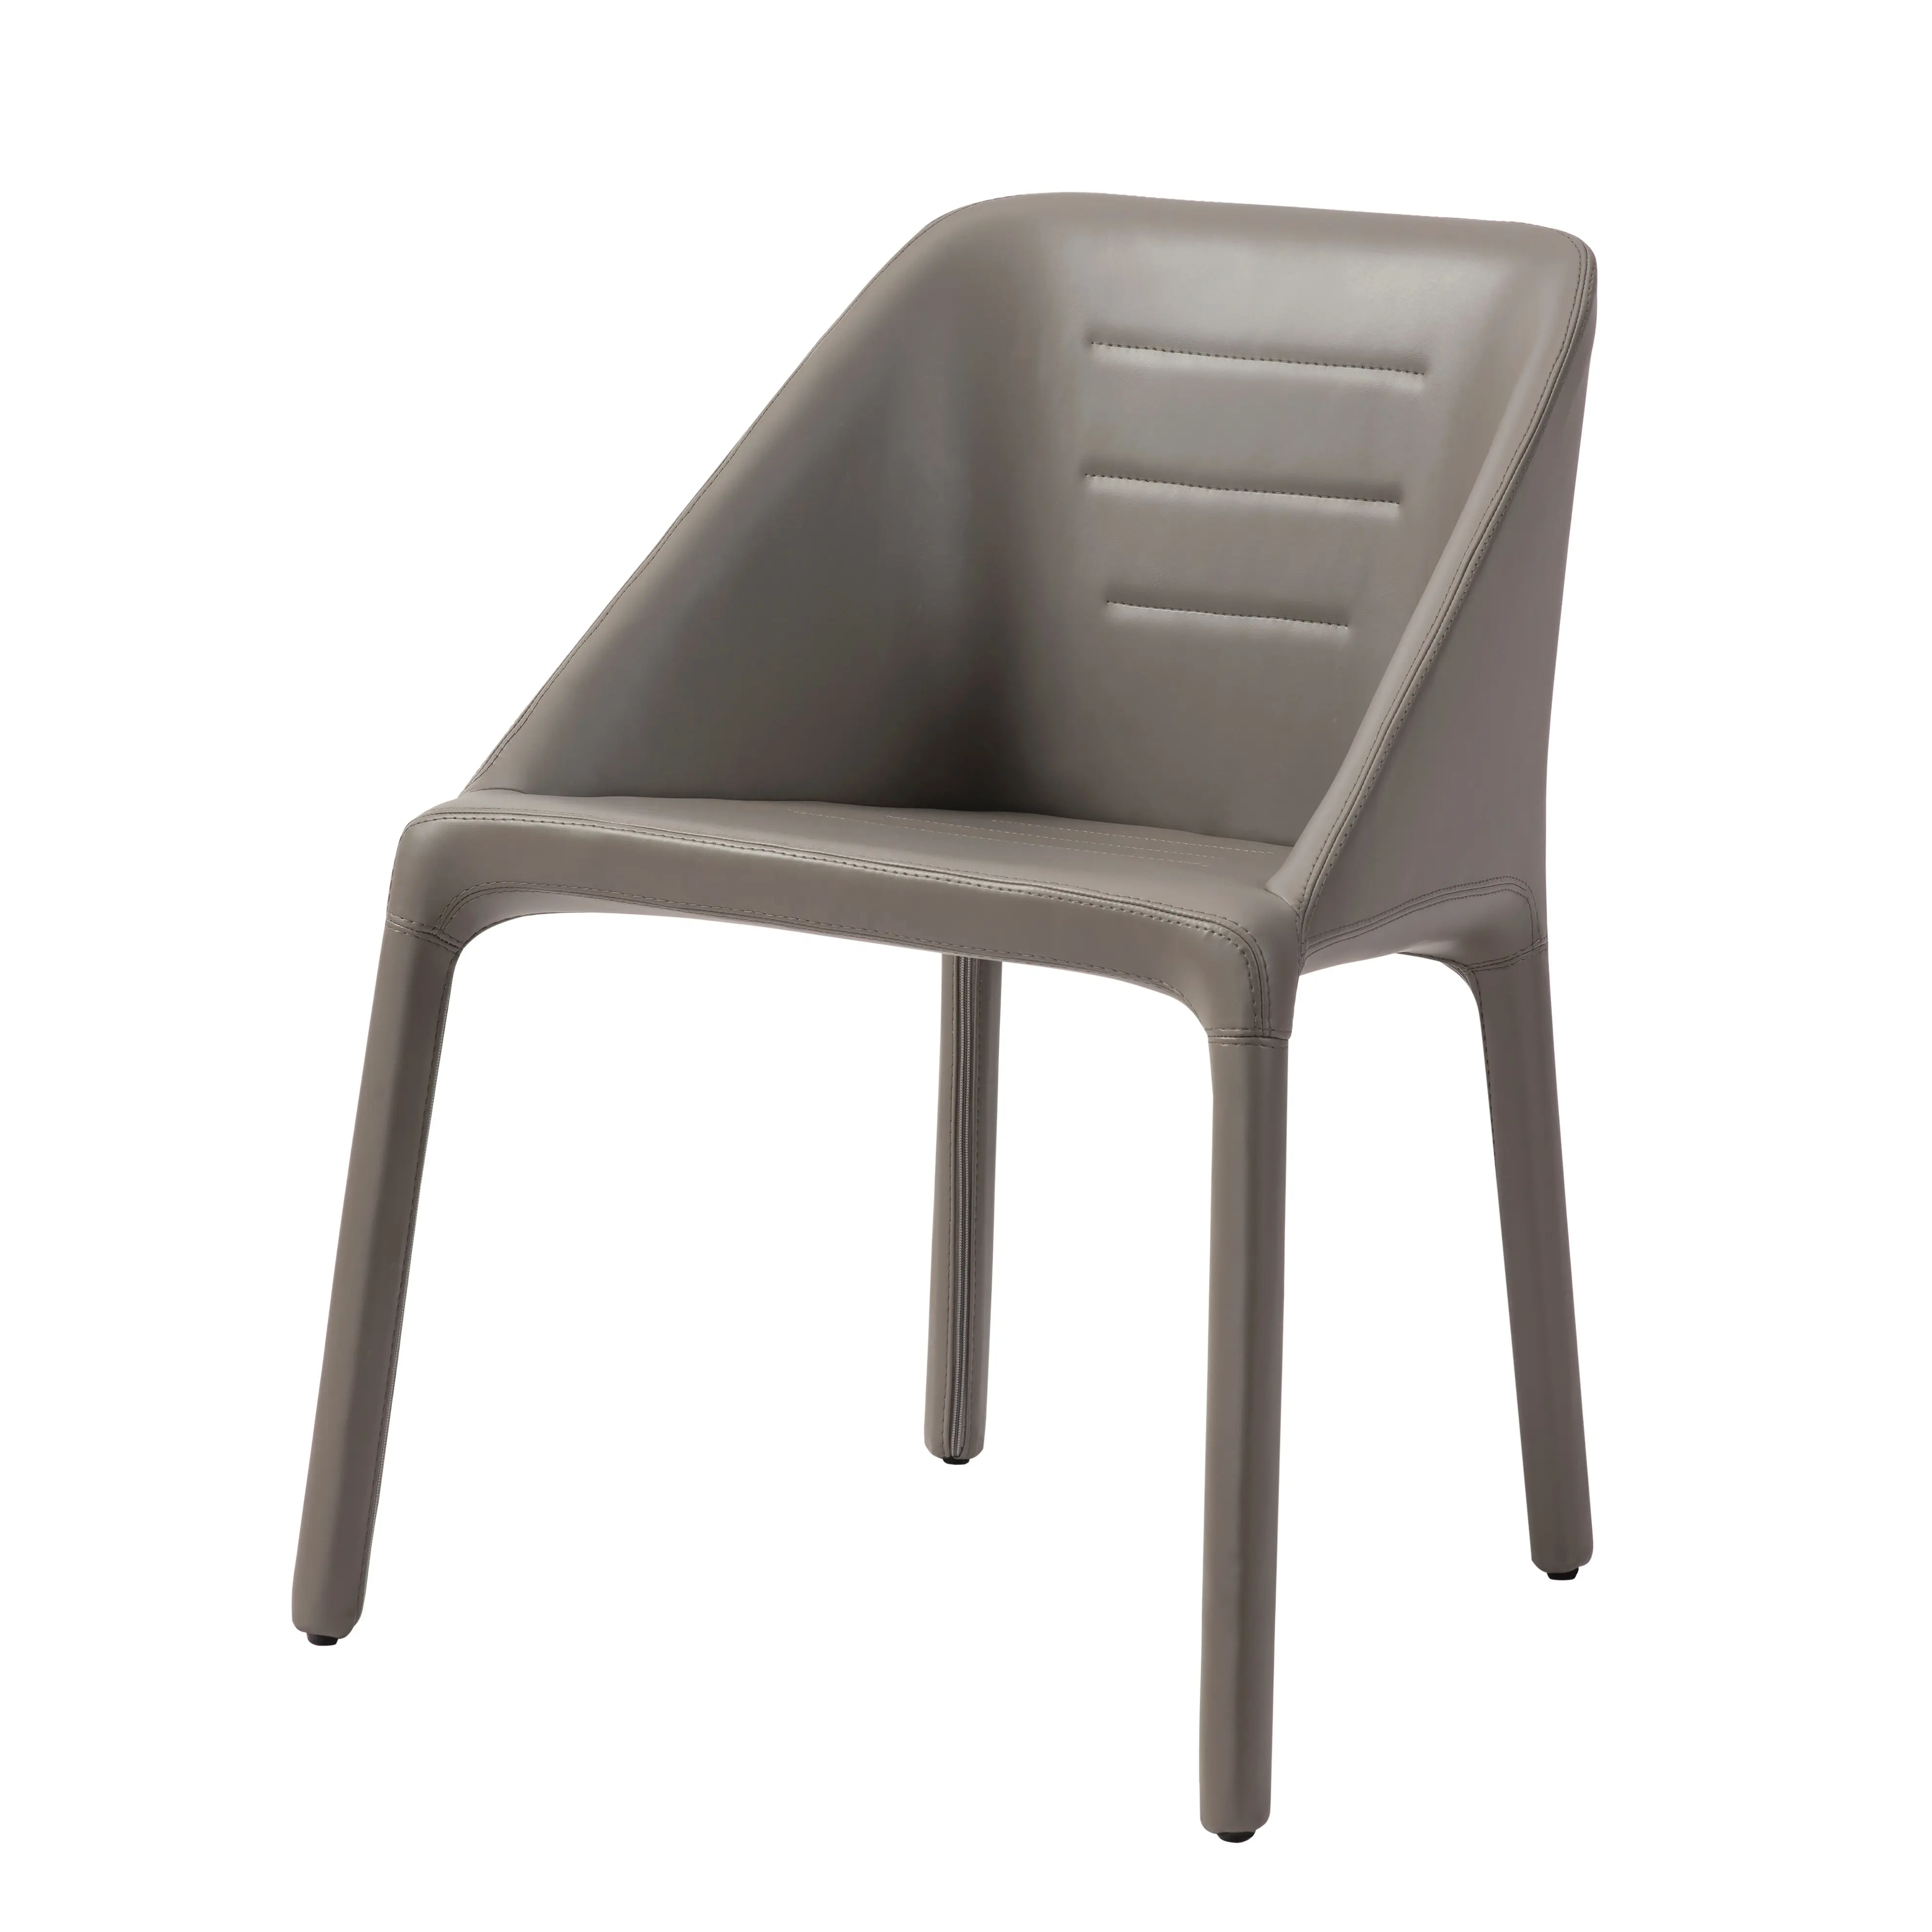 Modern Room Leather Furniture European Gray Cheap Leather Dining Chair